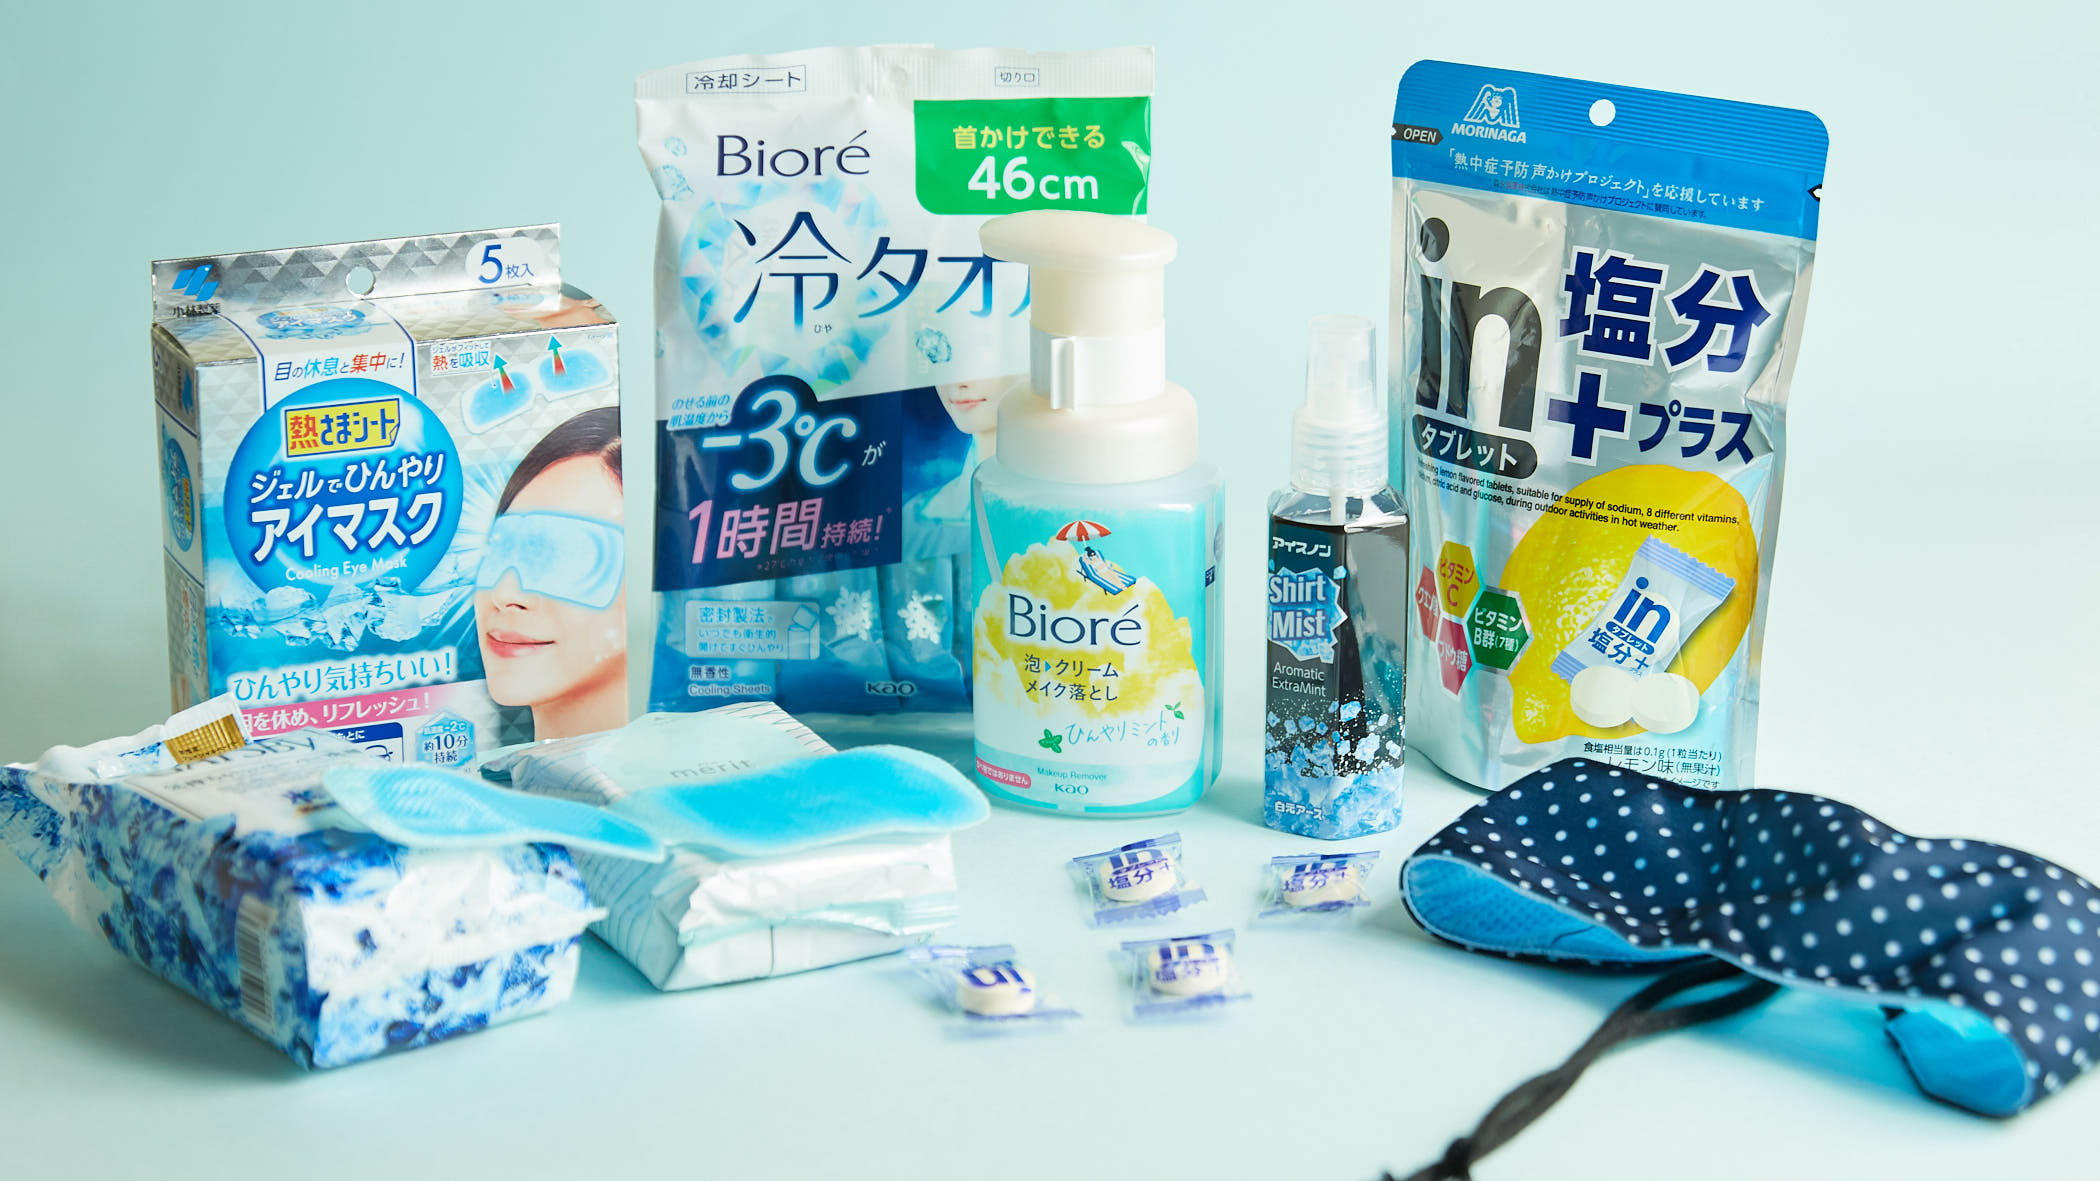 7 best Japanese products you need to stay cool this summer